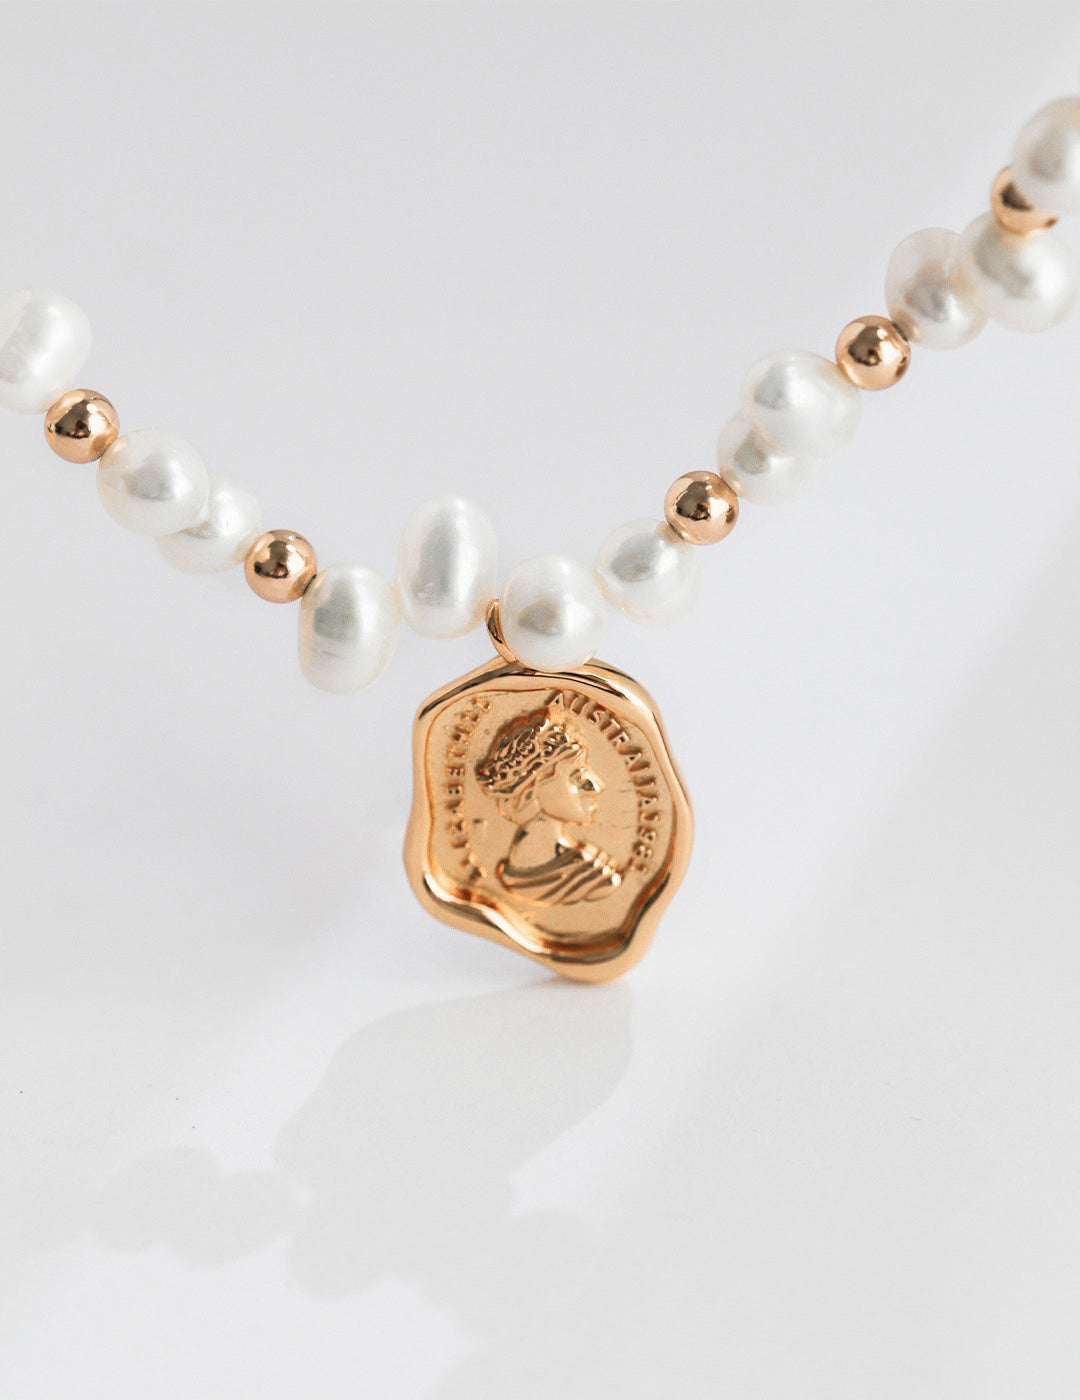 Queen's natural pearl necklace